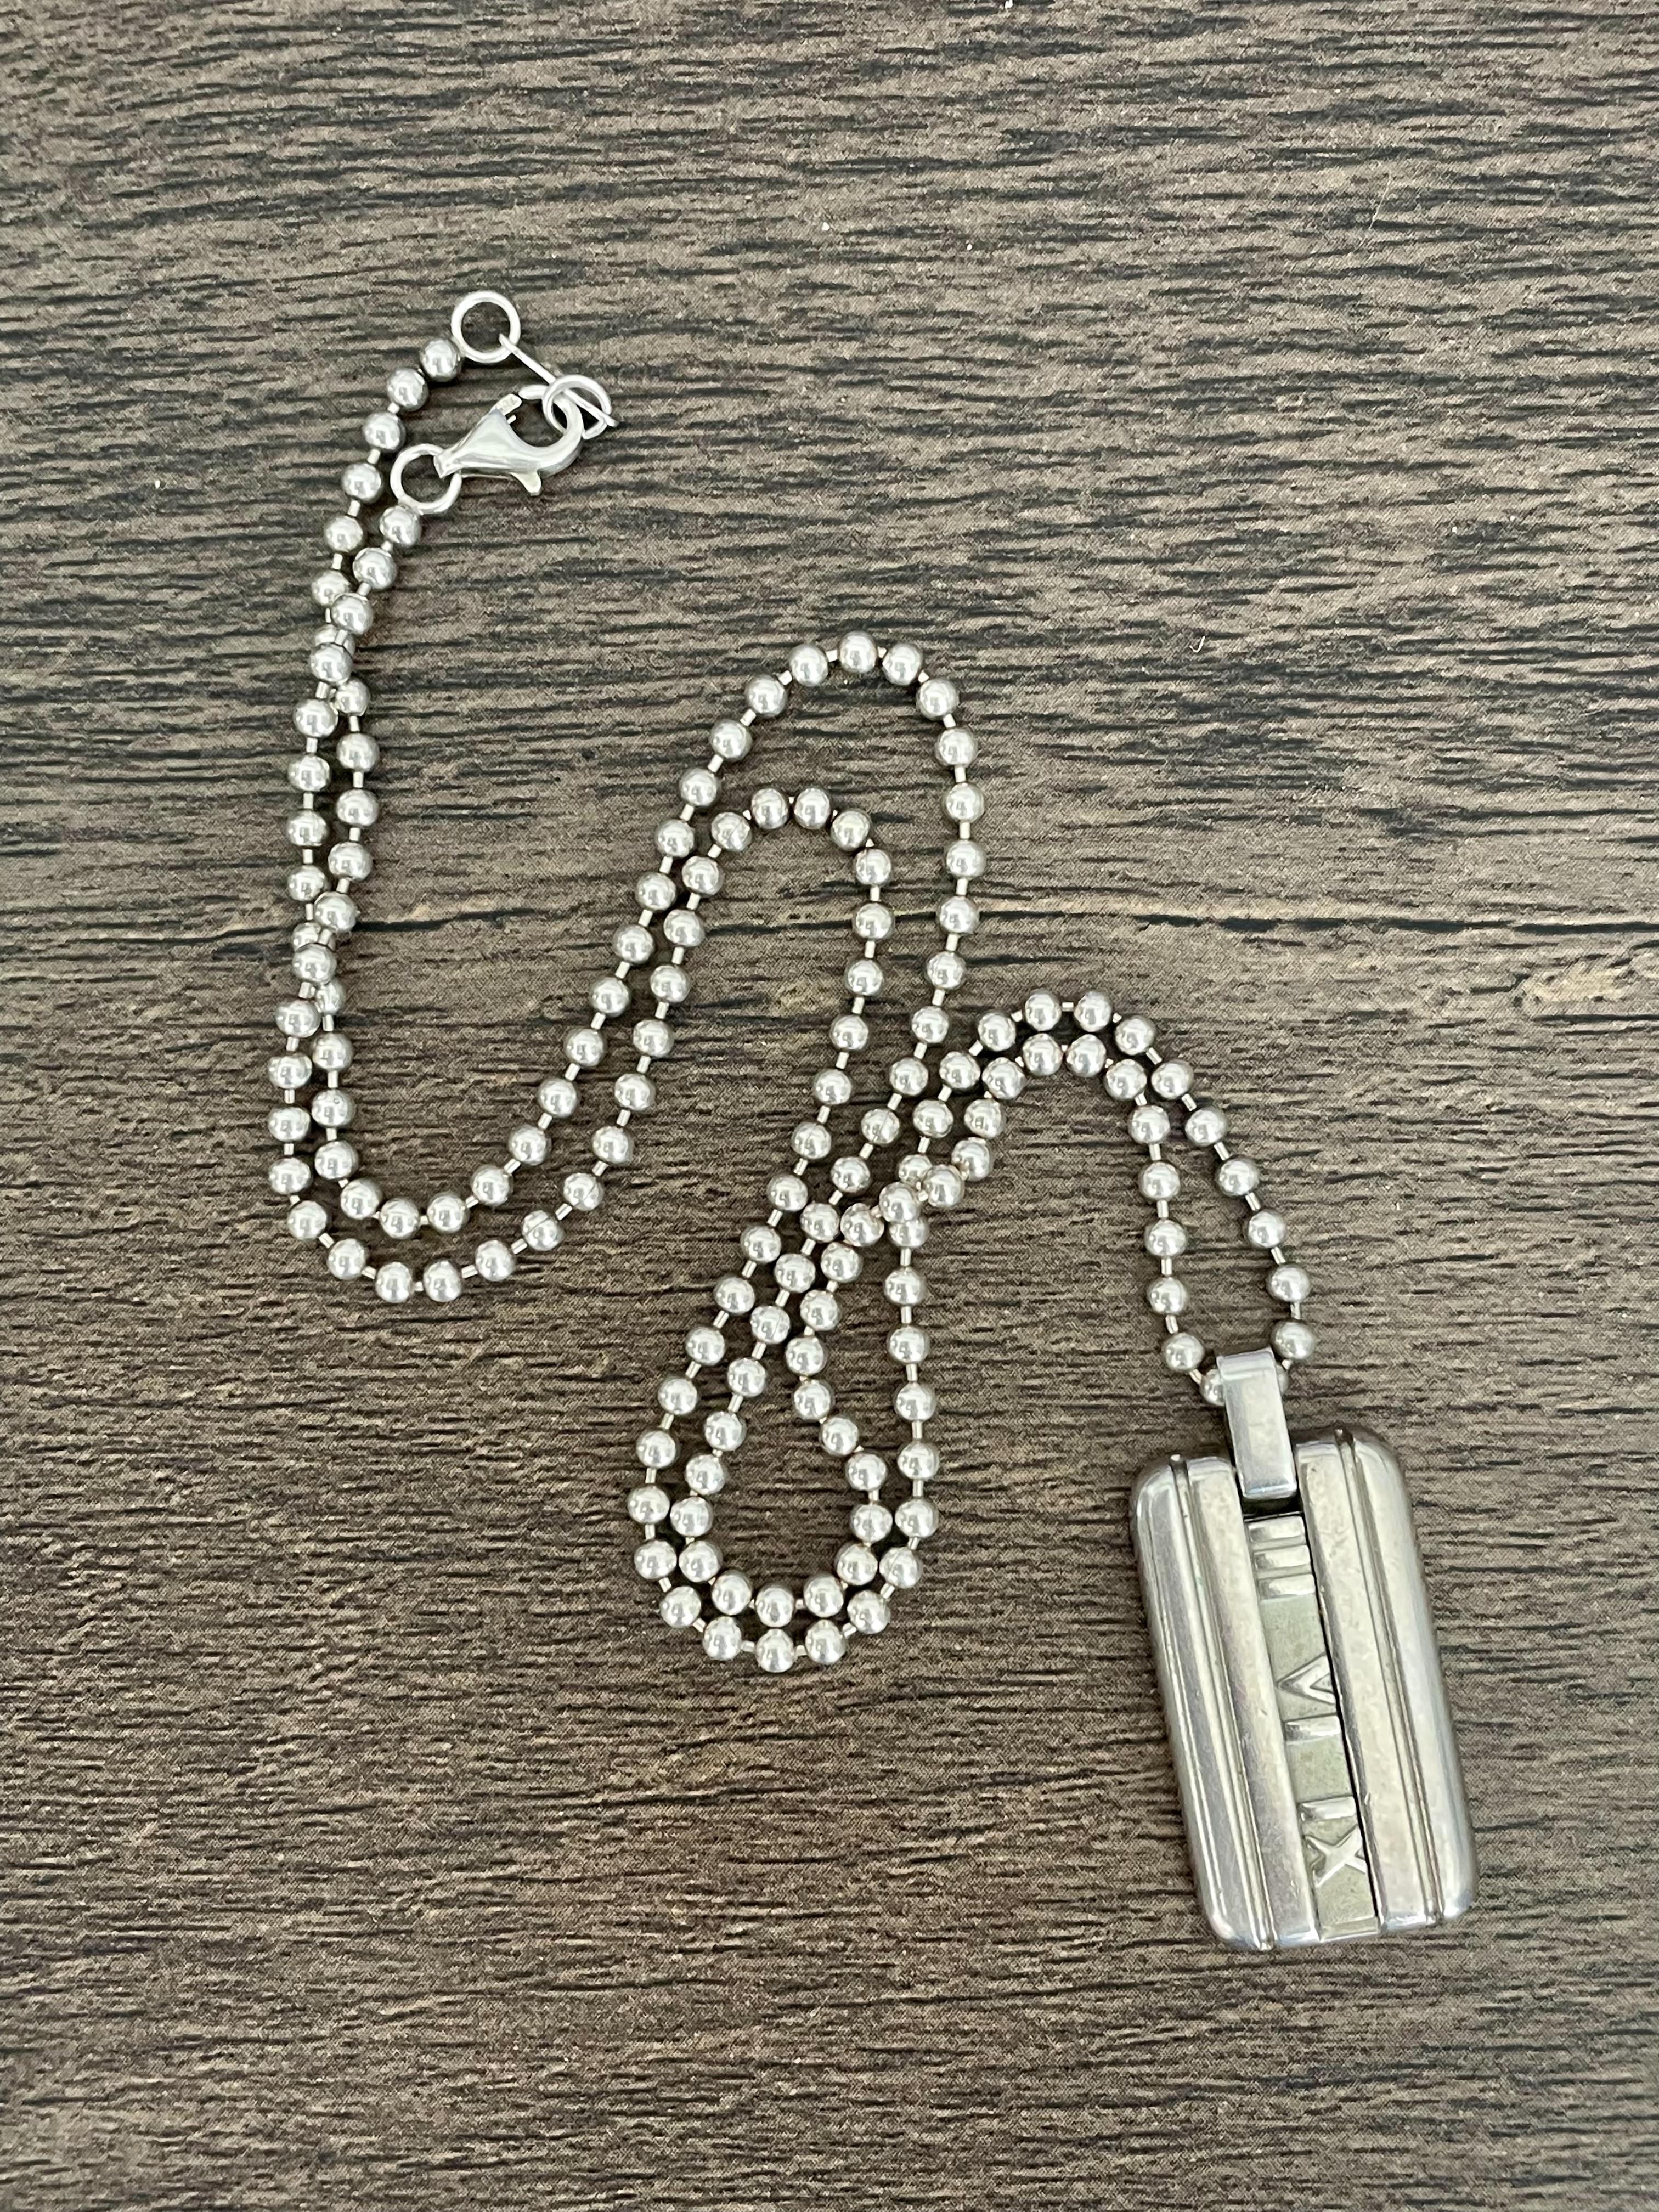 This is a classic modern Tiffany & Company dog tag pendant and bead link chain.  The closure is a great working condition lobster claw.

Stamps:  
Pendant: ATLAS @ 2003 TIFFANY 7 CO. 925
Chain: TIFFANY & CO. 925

Pendant measurement:  1